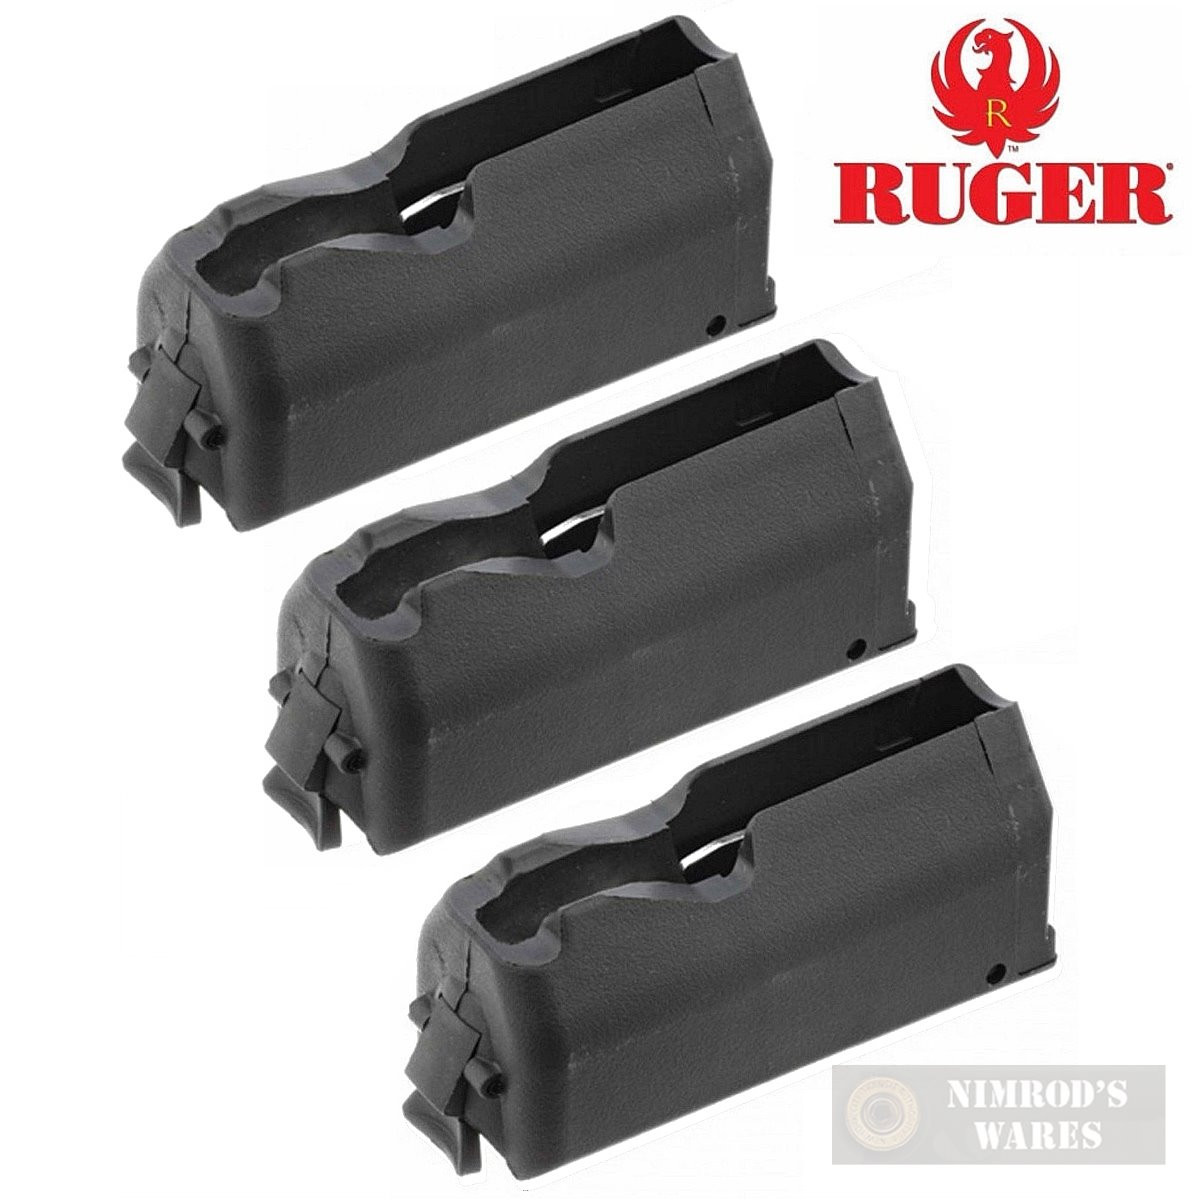 RUGER MAG AMERICAN RIFLE 22-250 4RD